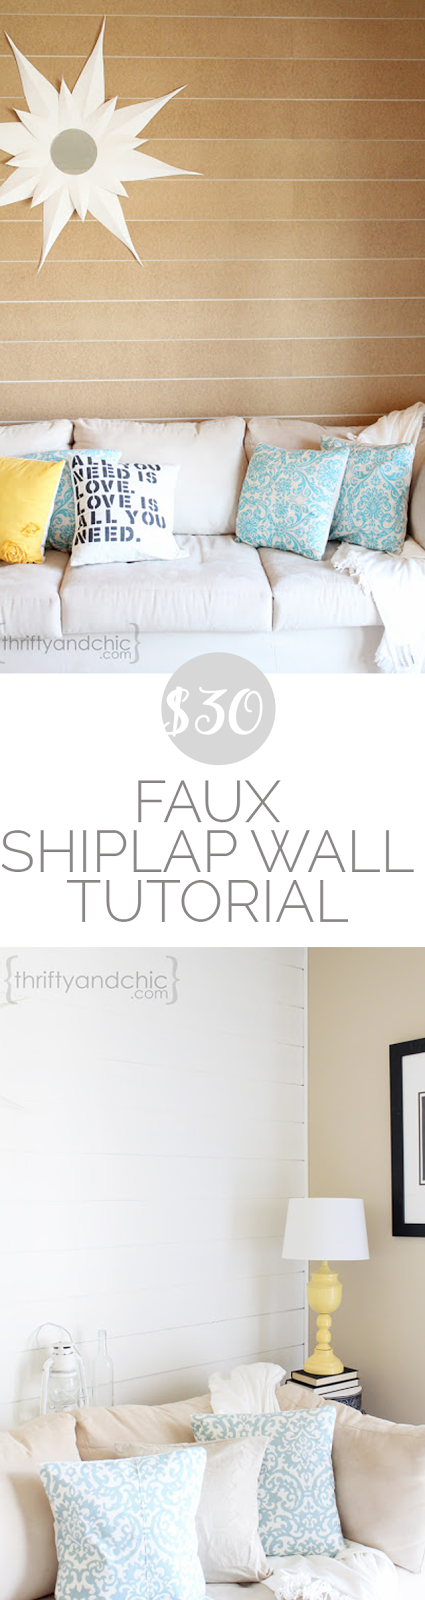 DIY shiplap wall tutorial all for under $30! DIY farmhouse decor and decorating ideas with shiplap or planked wall